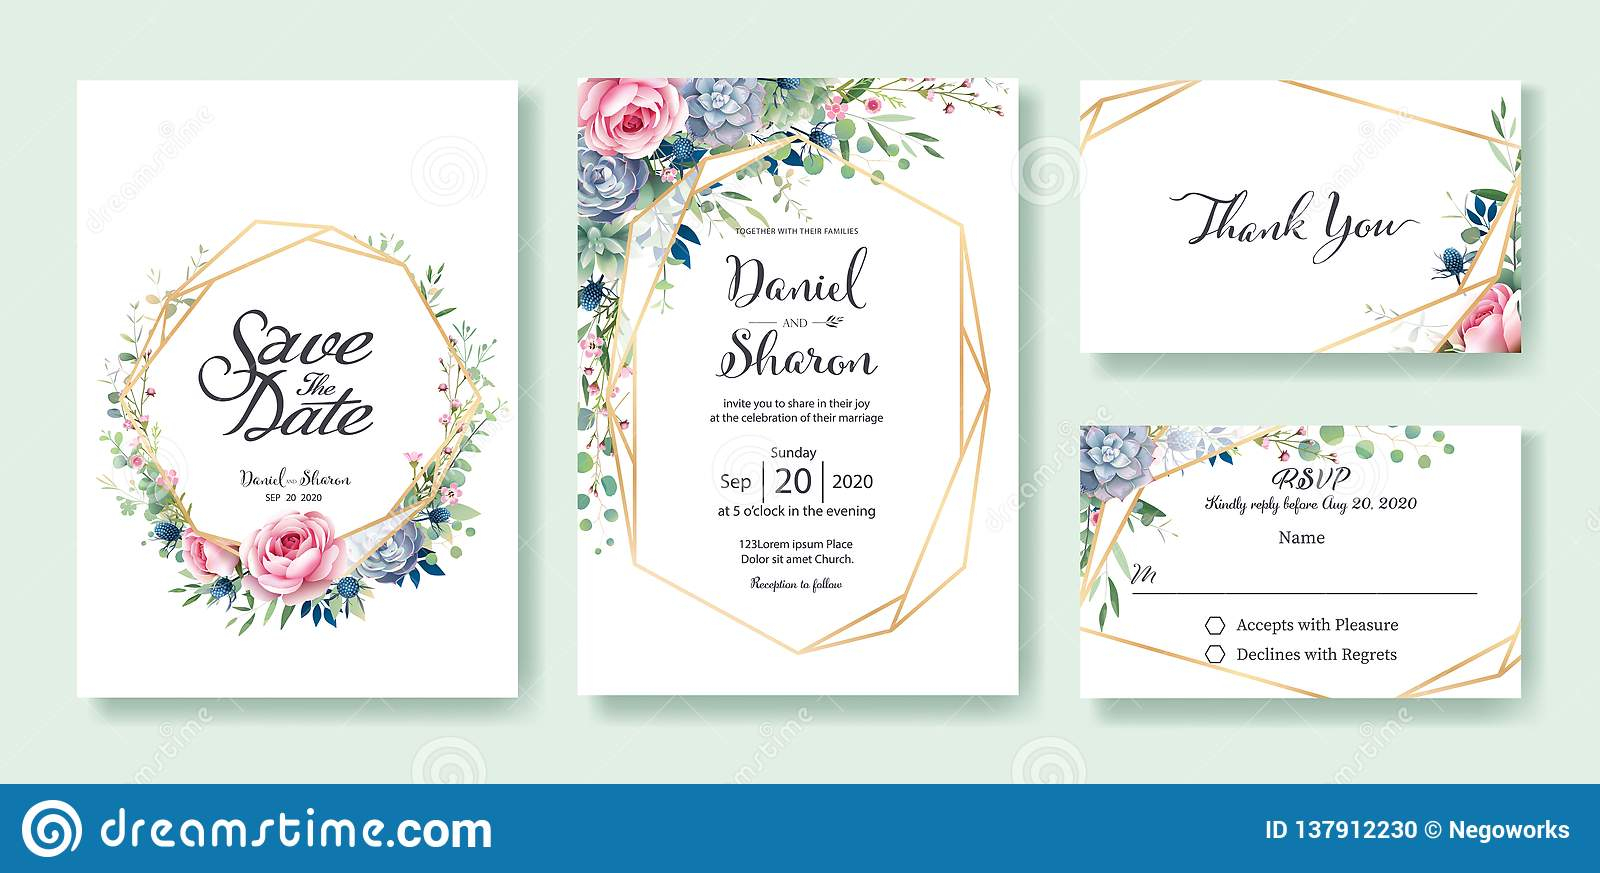 Wedding Invitation, Save The Date, Thank You, Rsvp Card Intended For Template For Rsvp Cards For Wedding